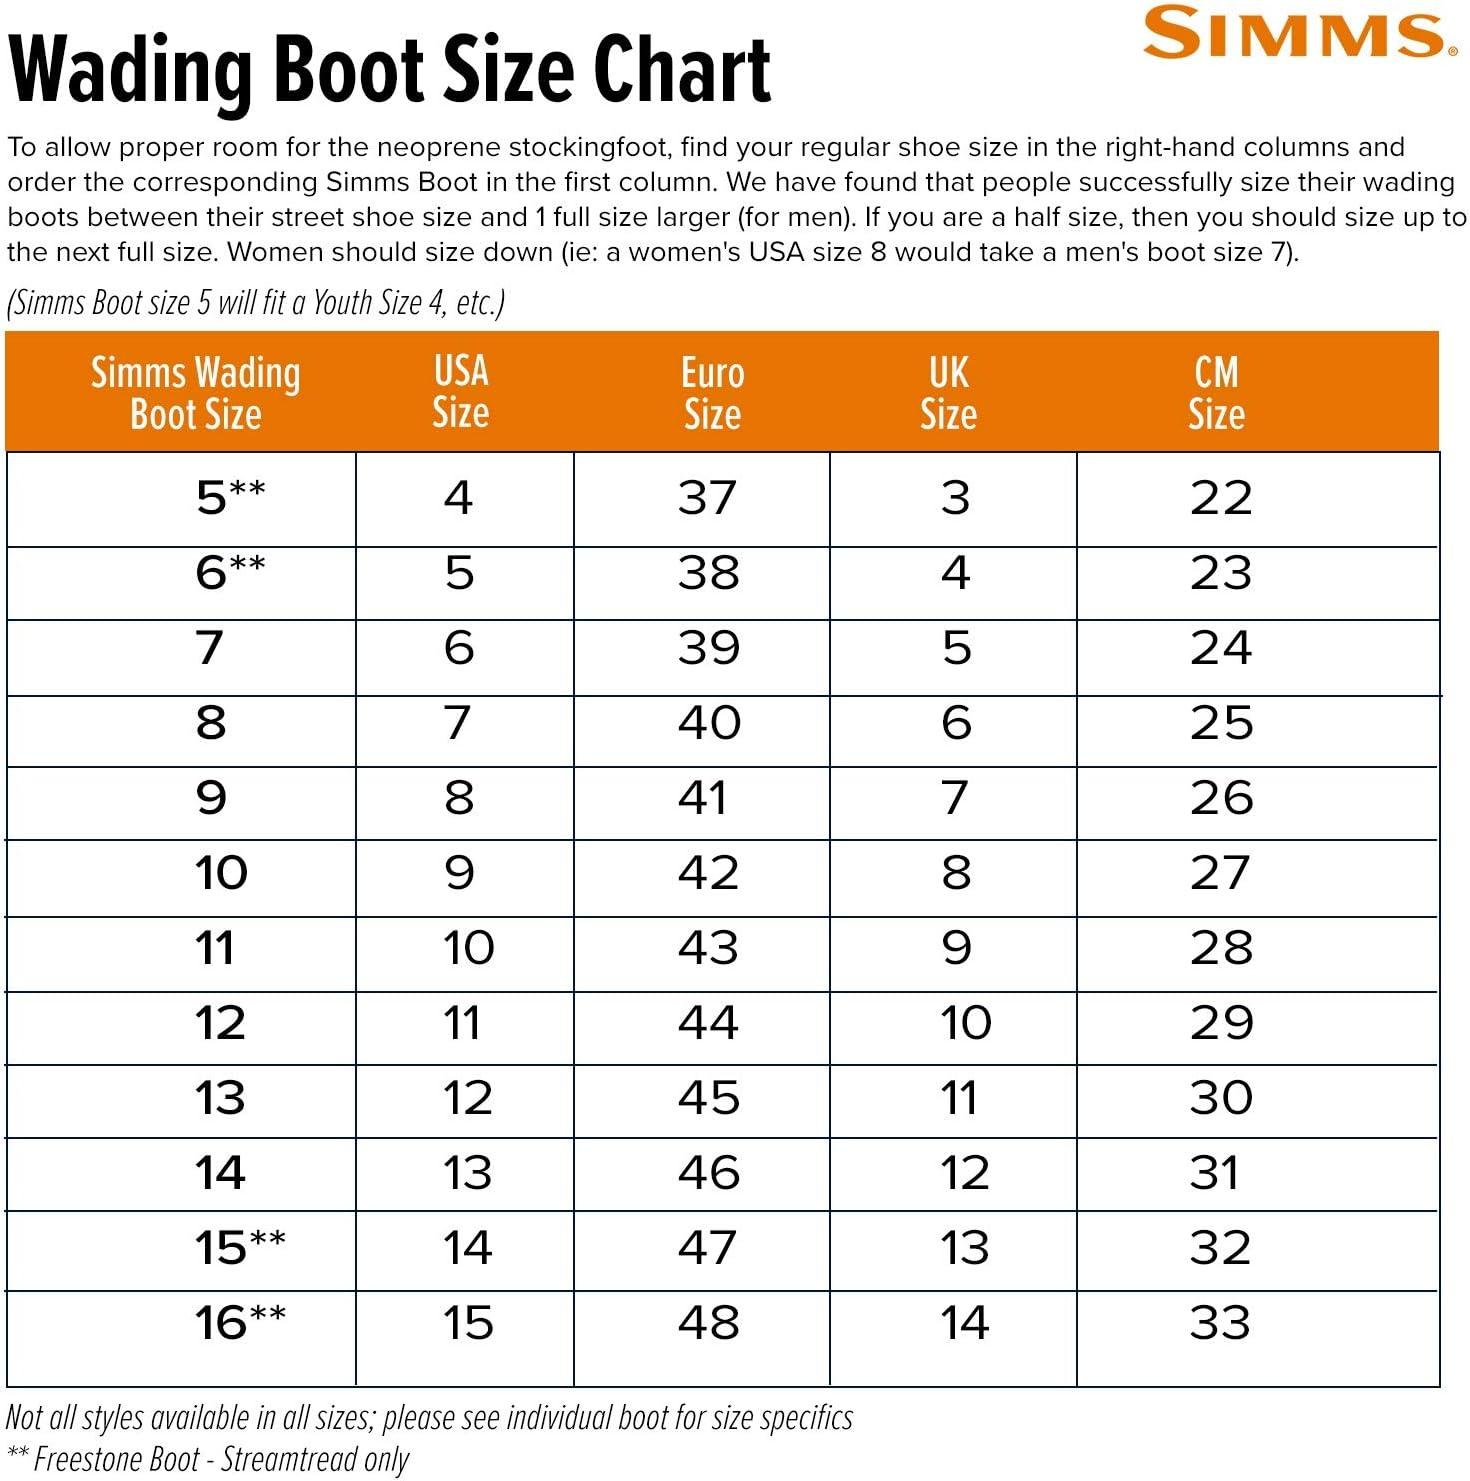 Simms Men's Freestone Wading Boots, Rubber Sole Fishing Boots 10 Dark Olive